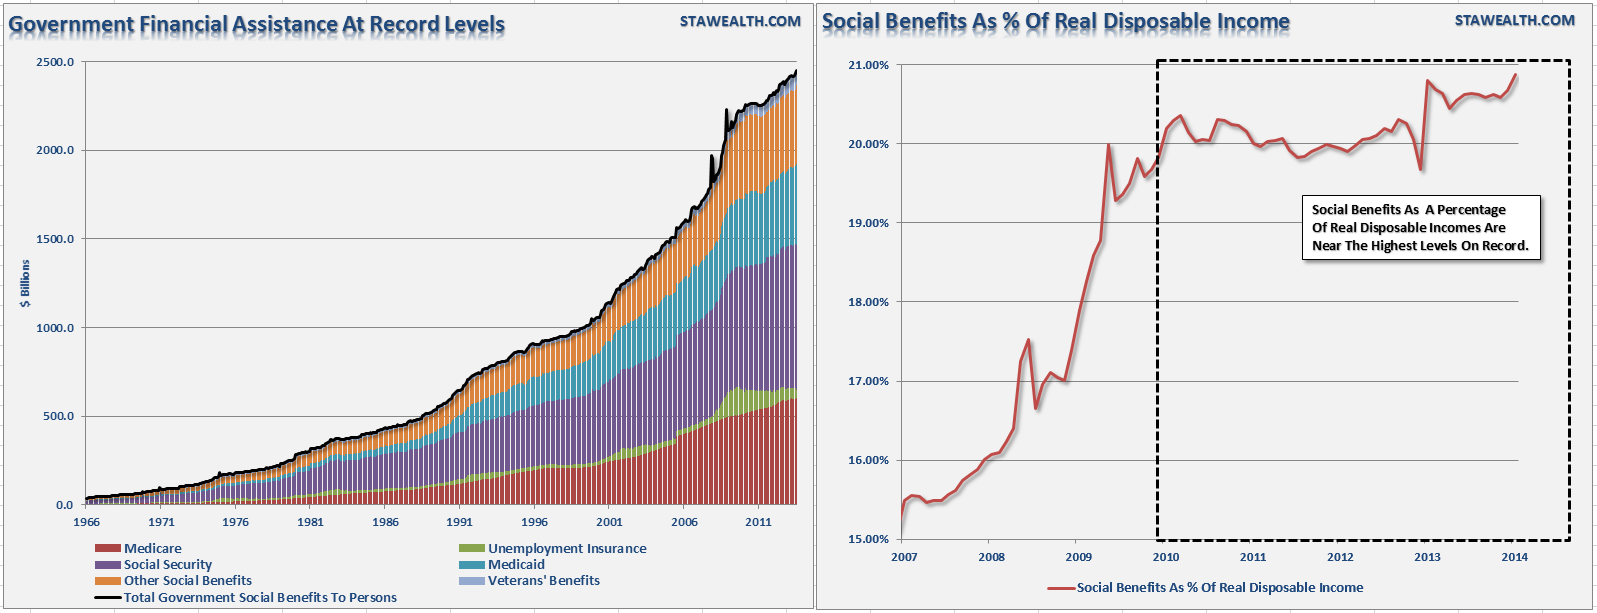 Government Financial Assistance vs Social Benefits as %  of Income